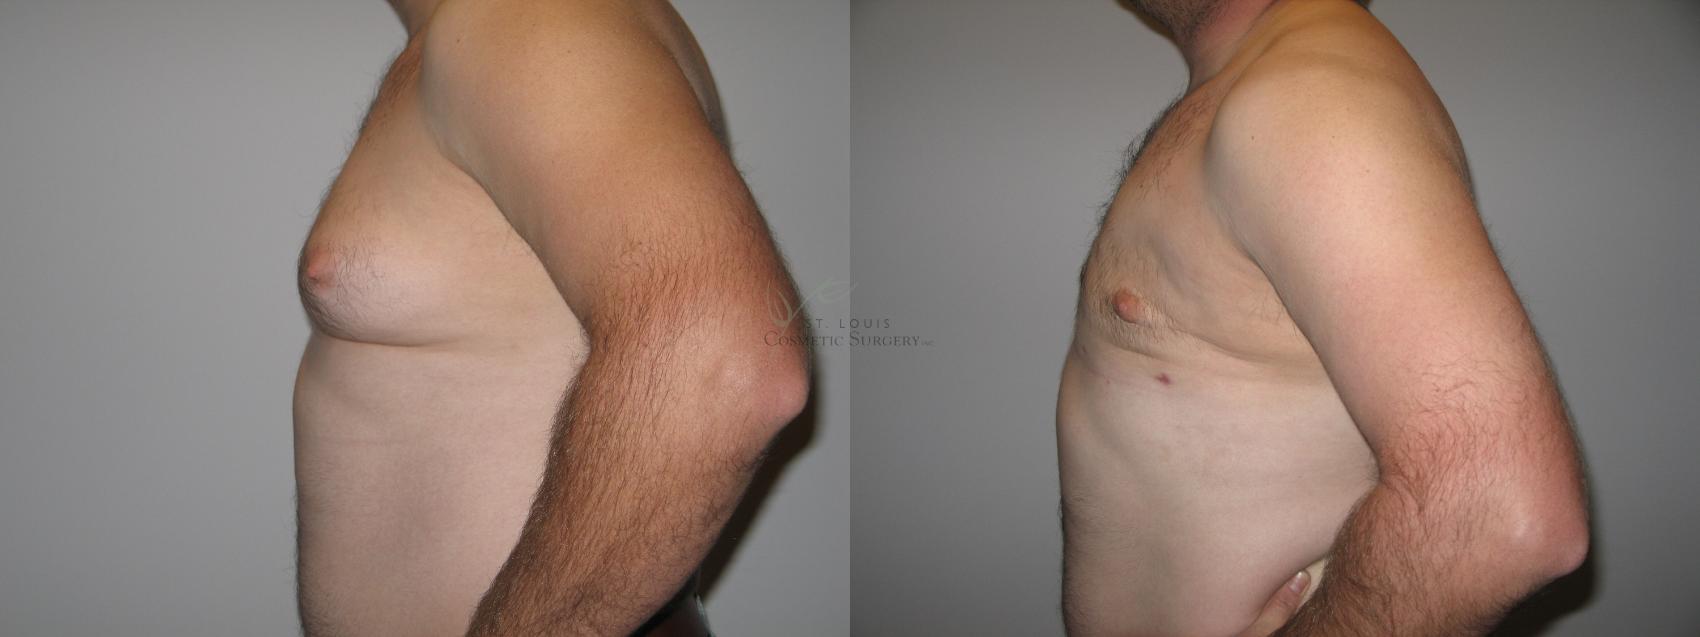 Male Breast Reduction Before & After Photo | St. Louis, MO | St. Louis Cosmetic Surgery